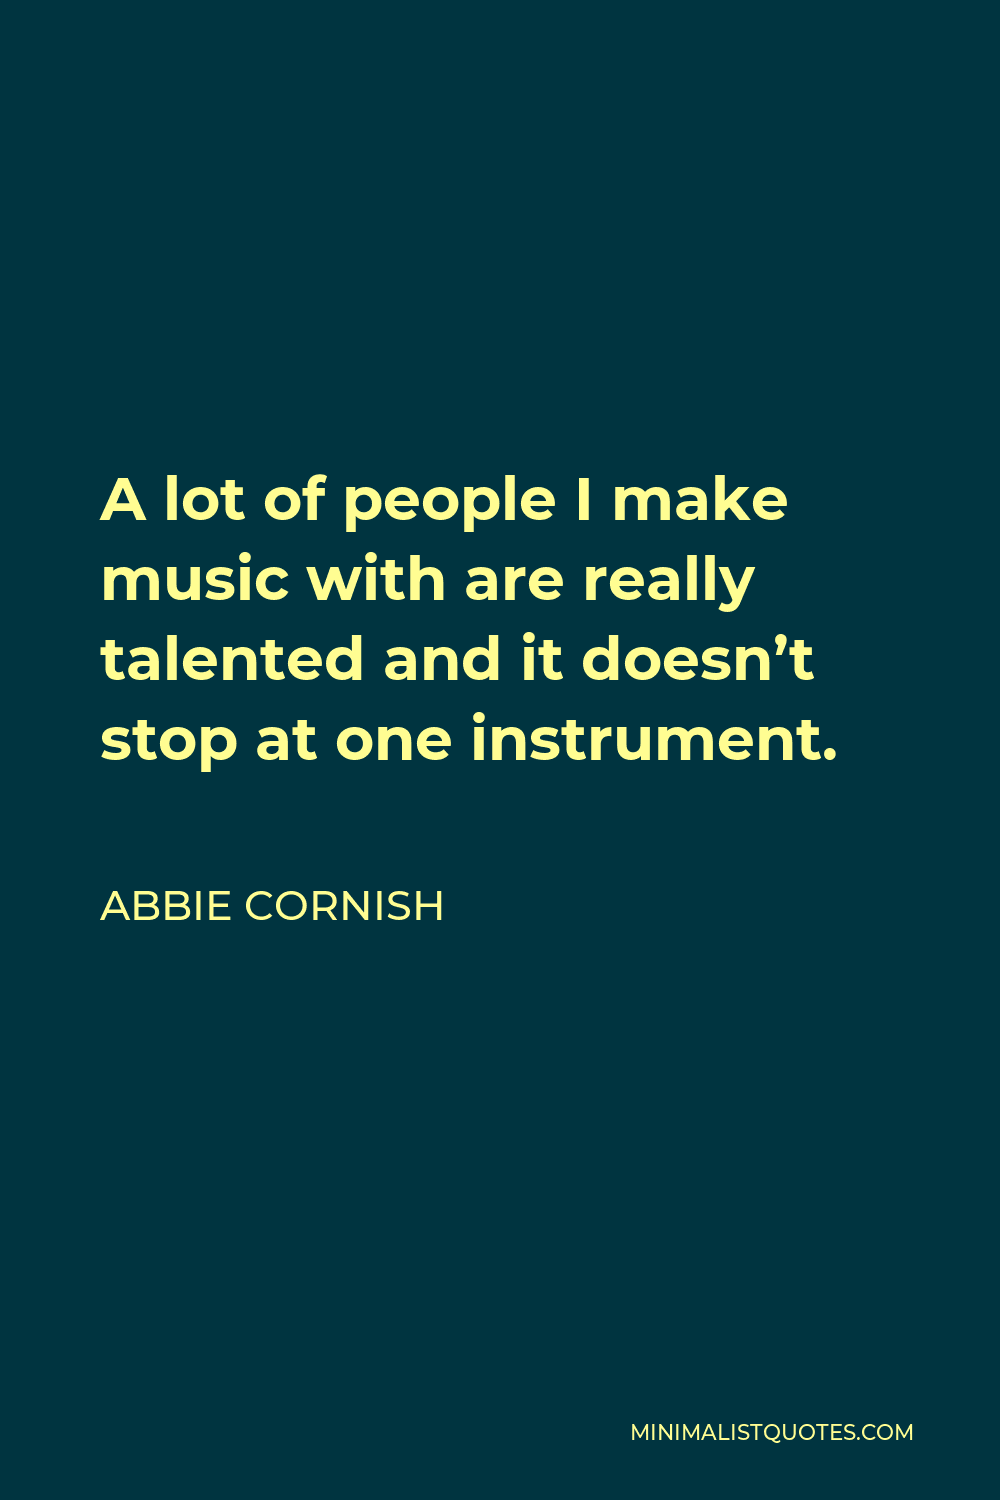 Abbie Cornish Quote - A lot of people I make music with are really talented and it doesn’t stop at one instrument.